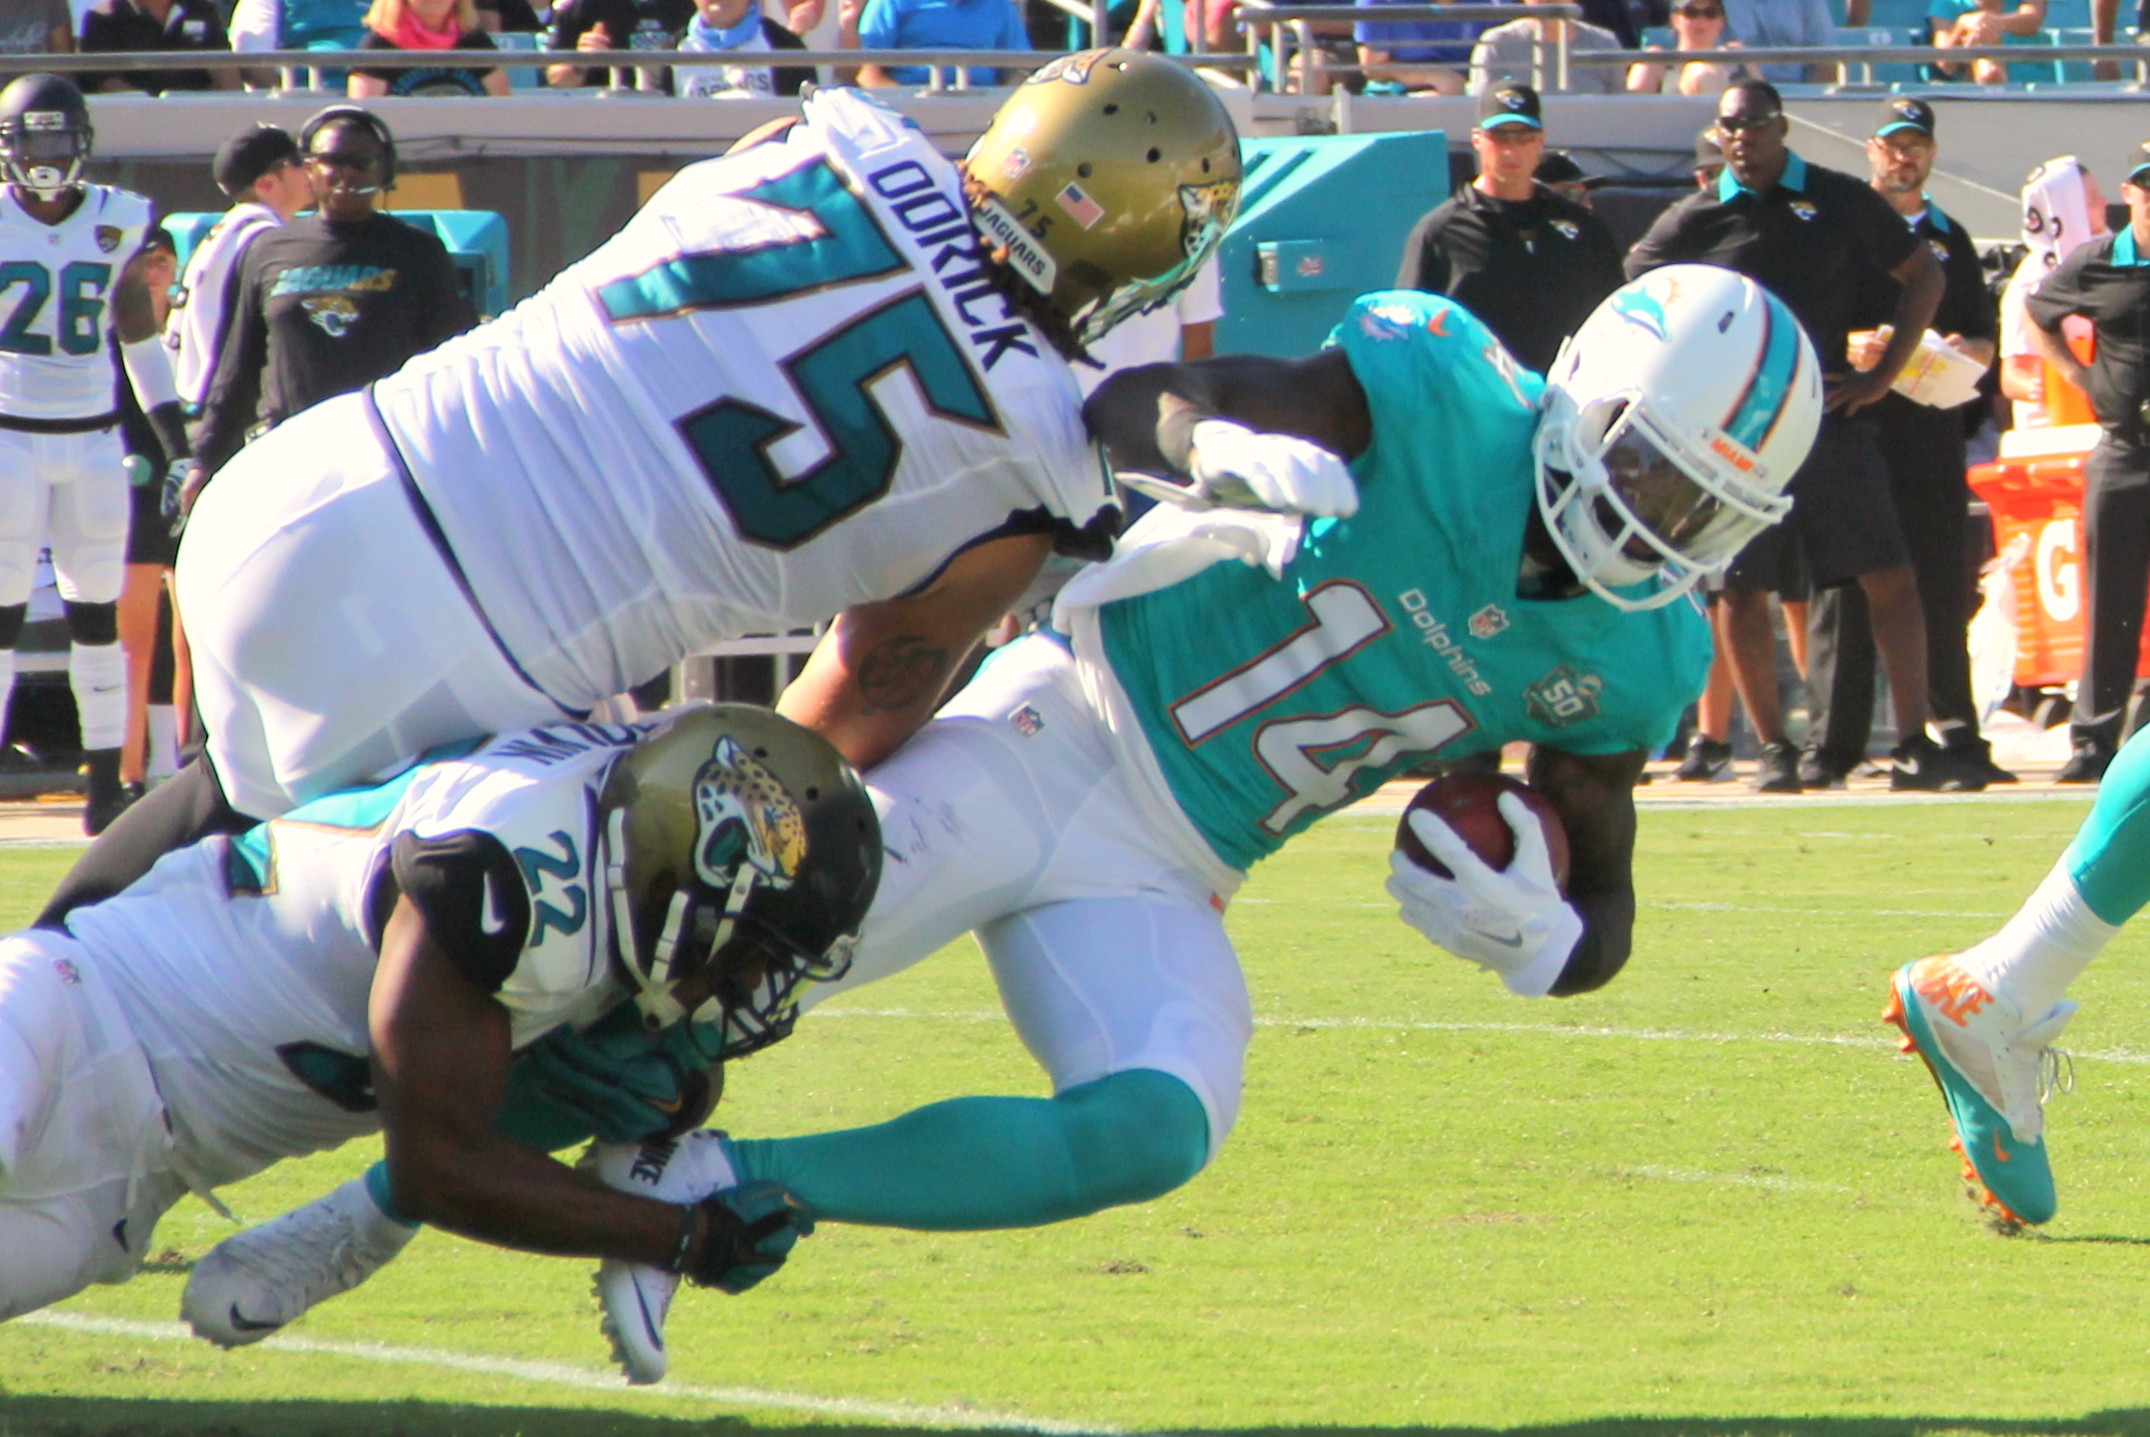 Miami’s leading receiver, No. 14 Jarvis Landry, made eight catches for 110 yards in 23-20 the loss to the Jaguars.